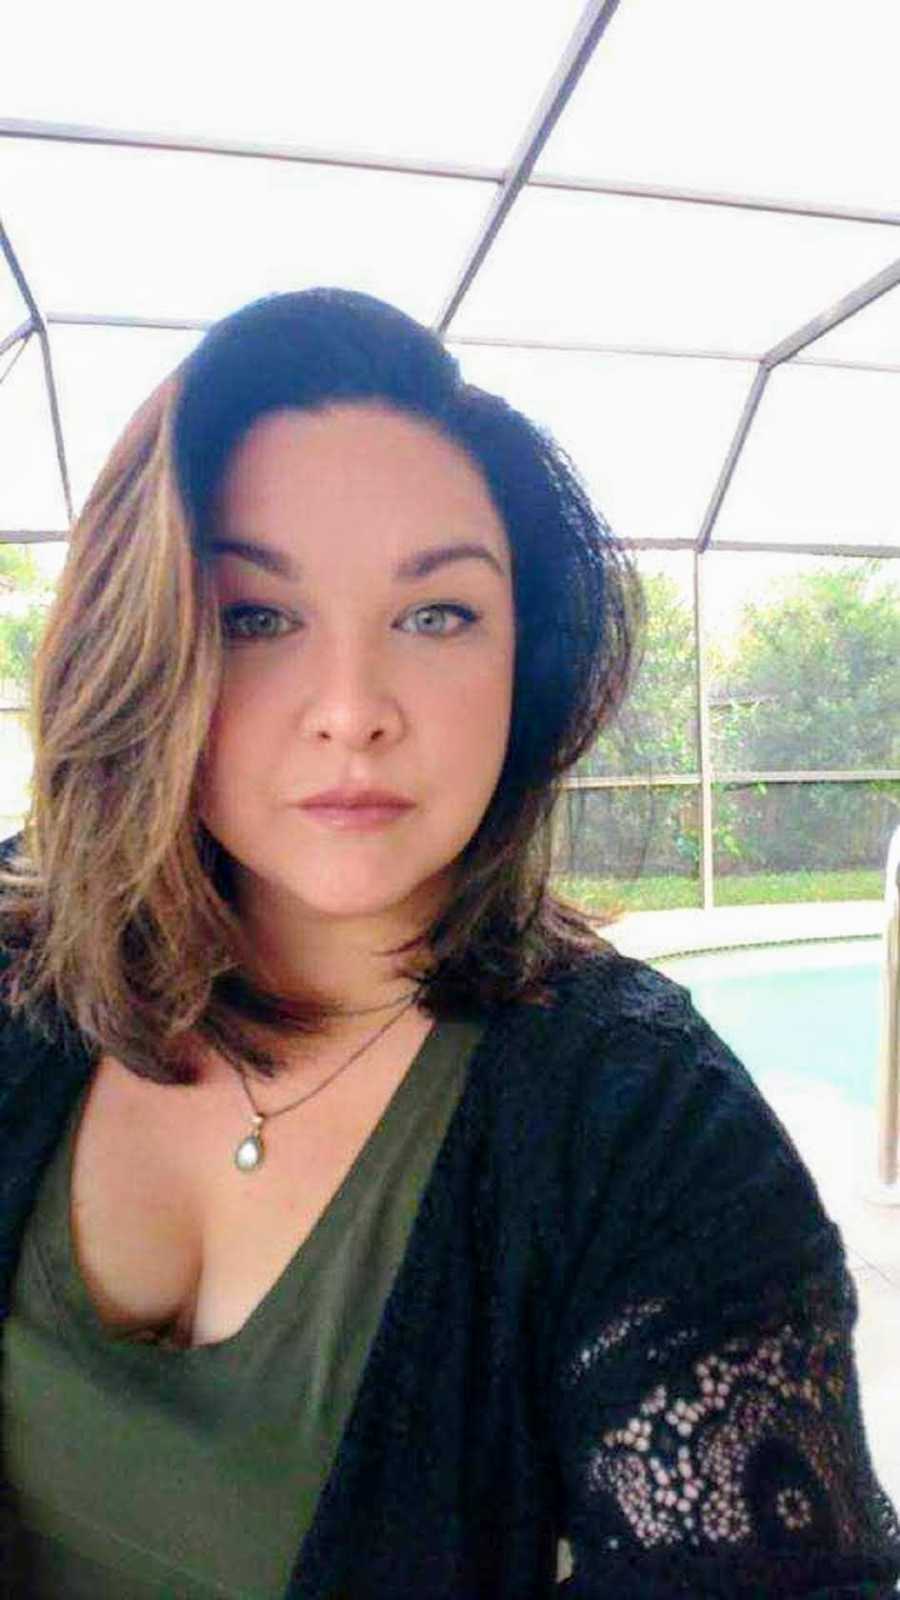 Woman who has struggled with her weight takes selfie in front of pool at home